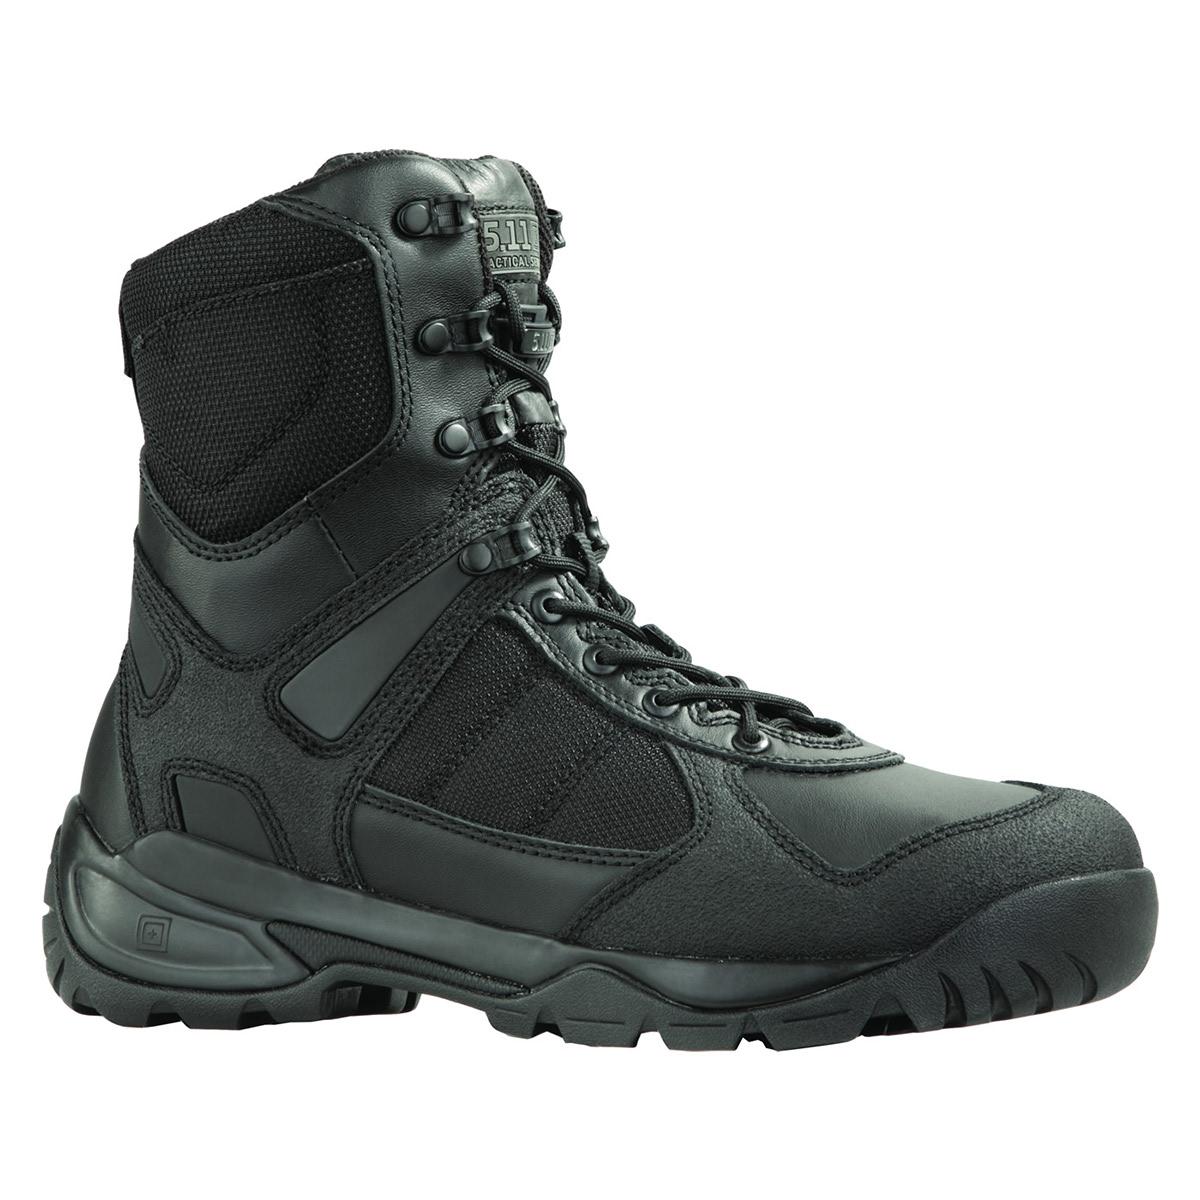 Speed Tactical Boot designed for 5.11 tactical by Ryan Dowd